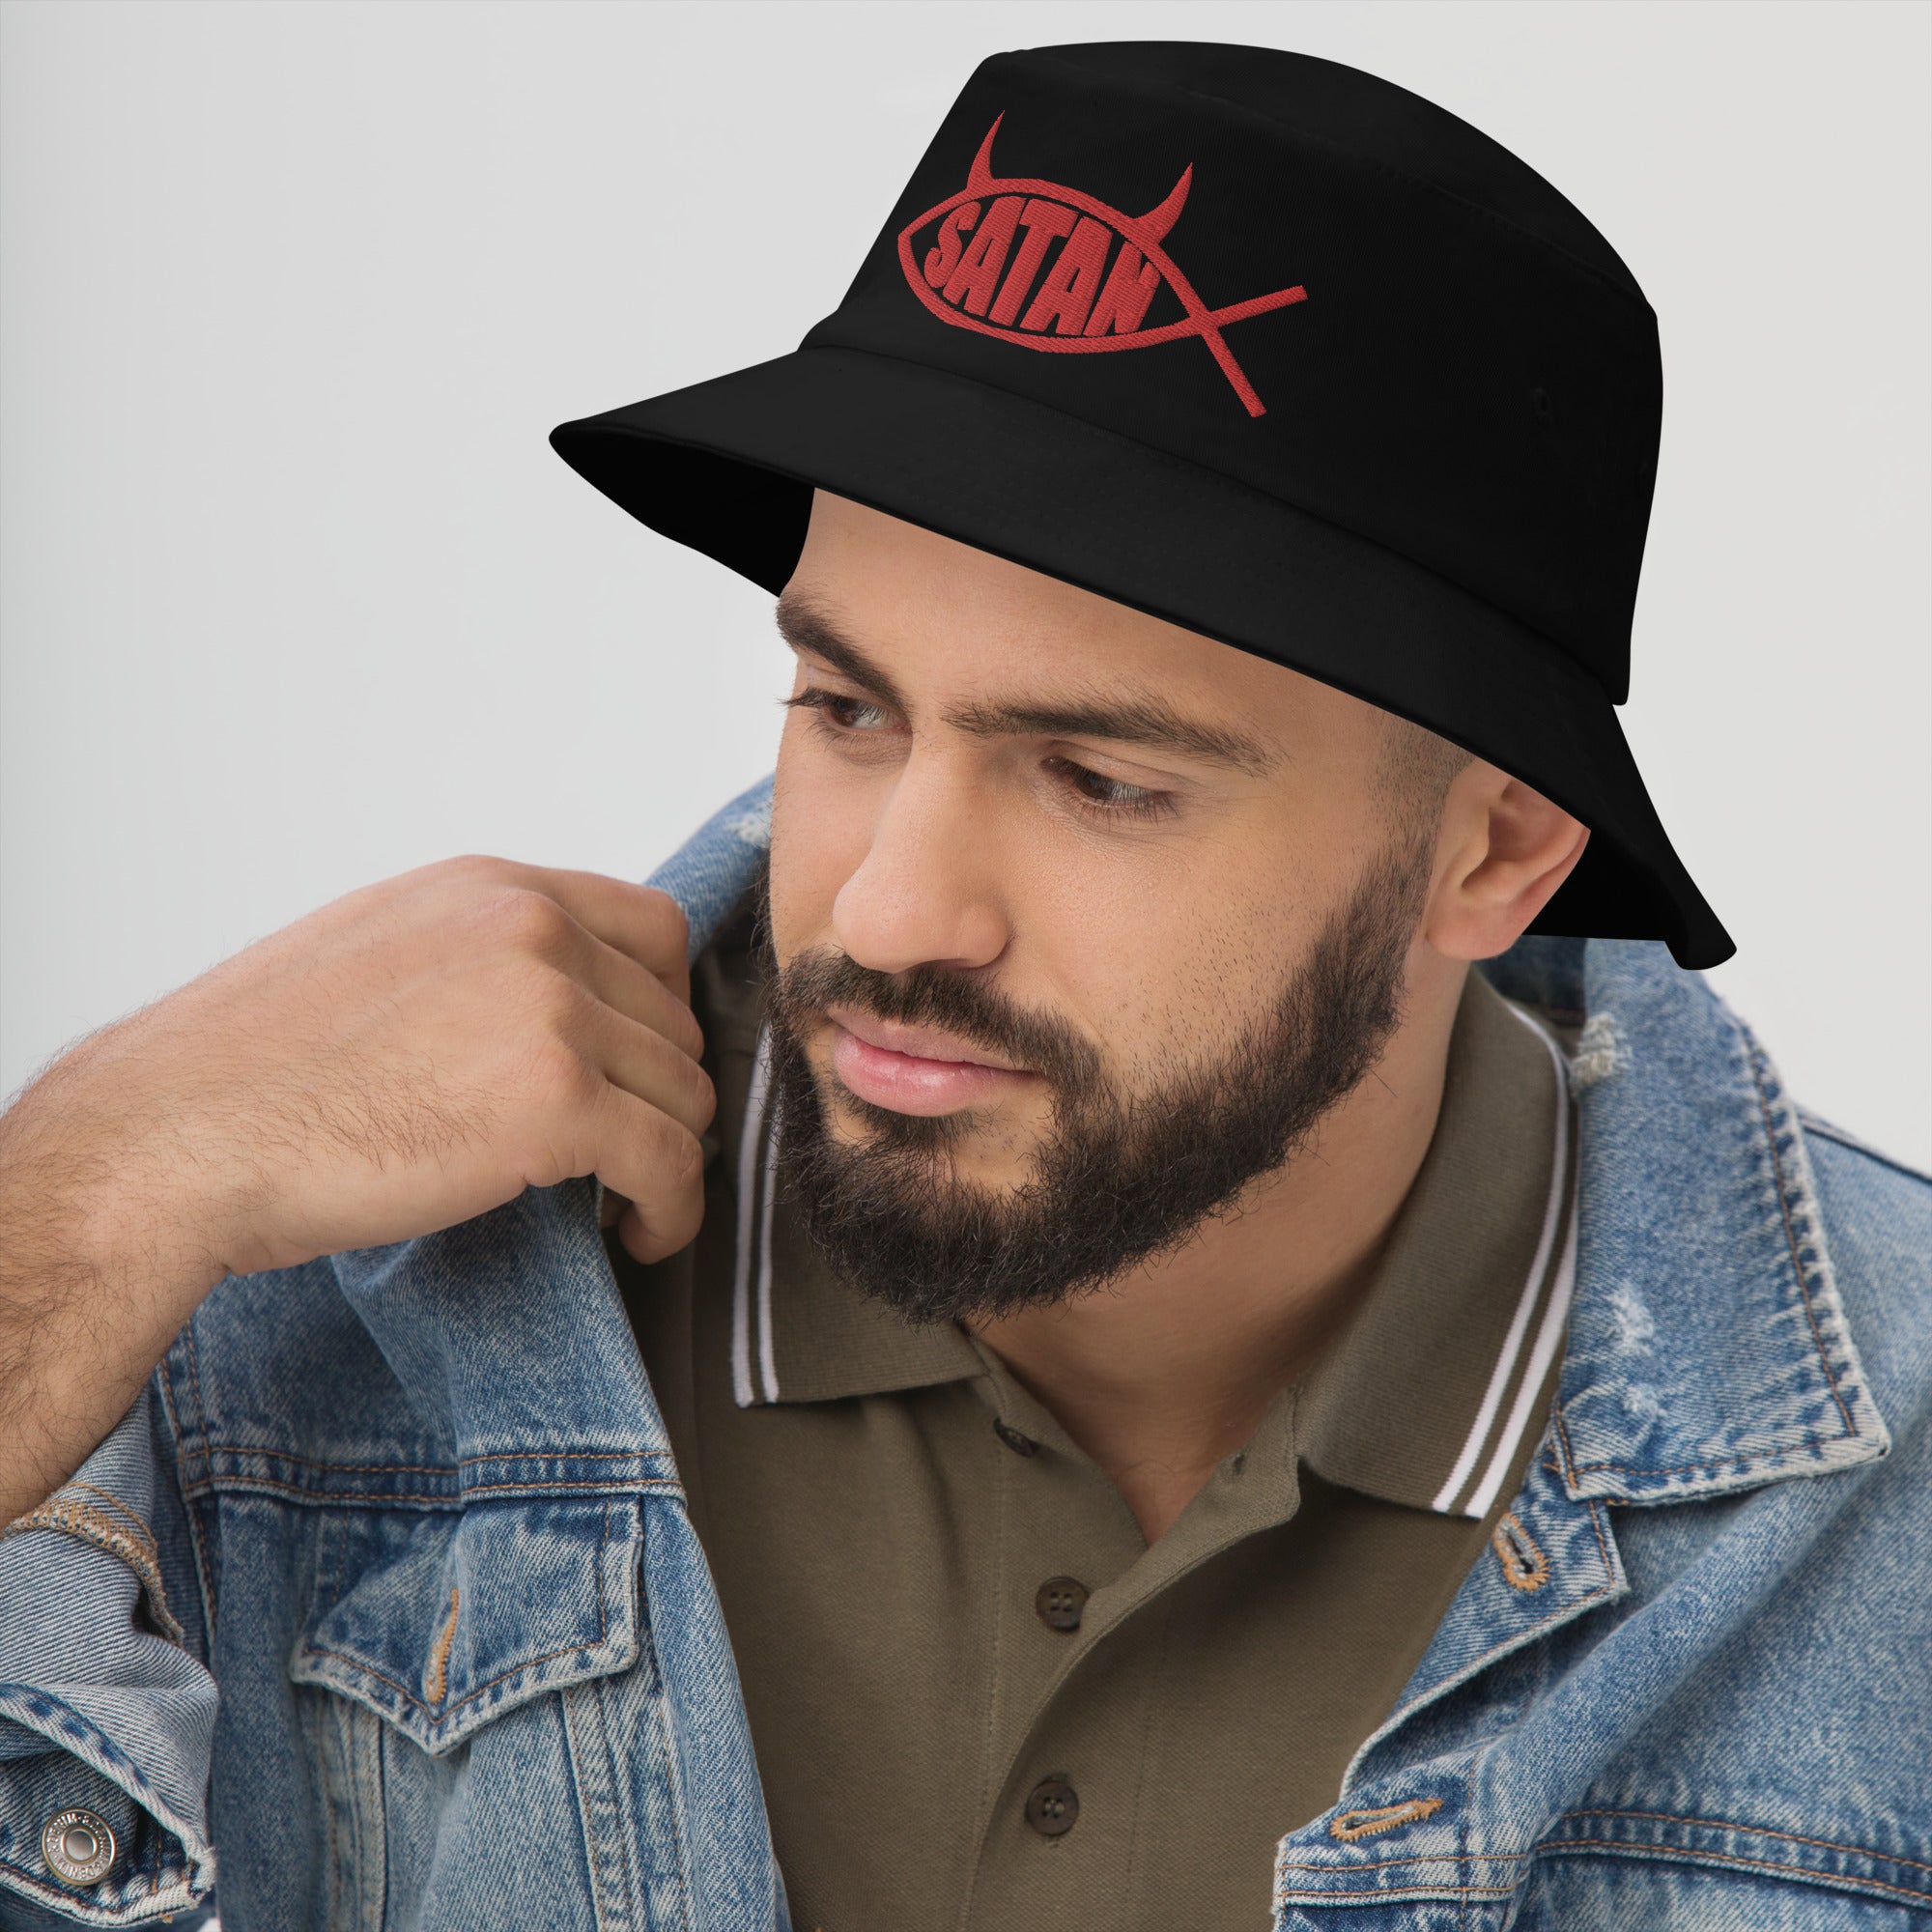 Red Satan Fish with Horns Religious Satire Embroidered Bucket Hat Satanic Church